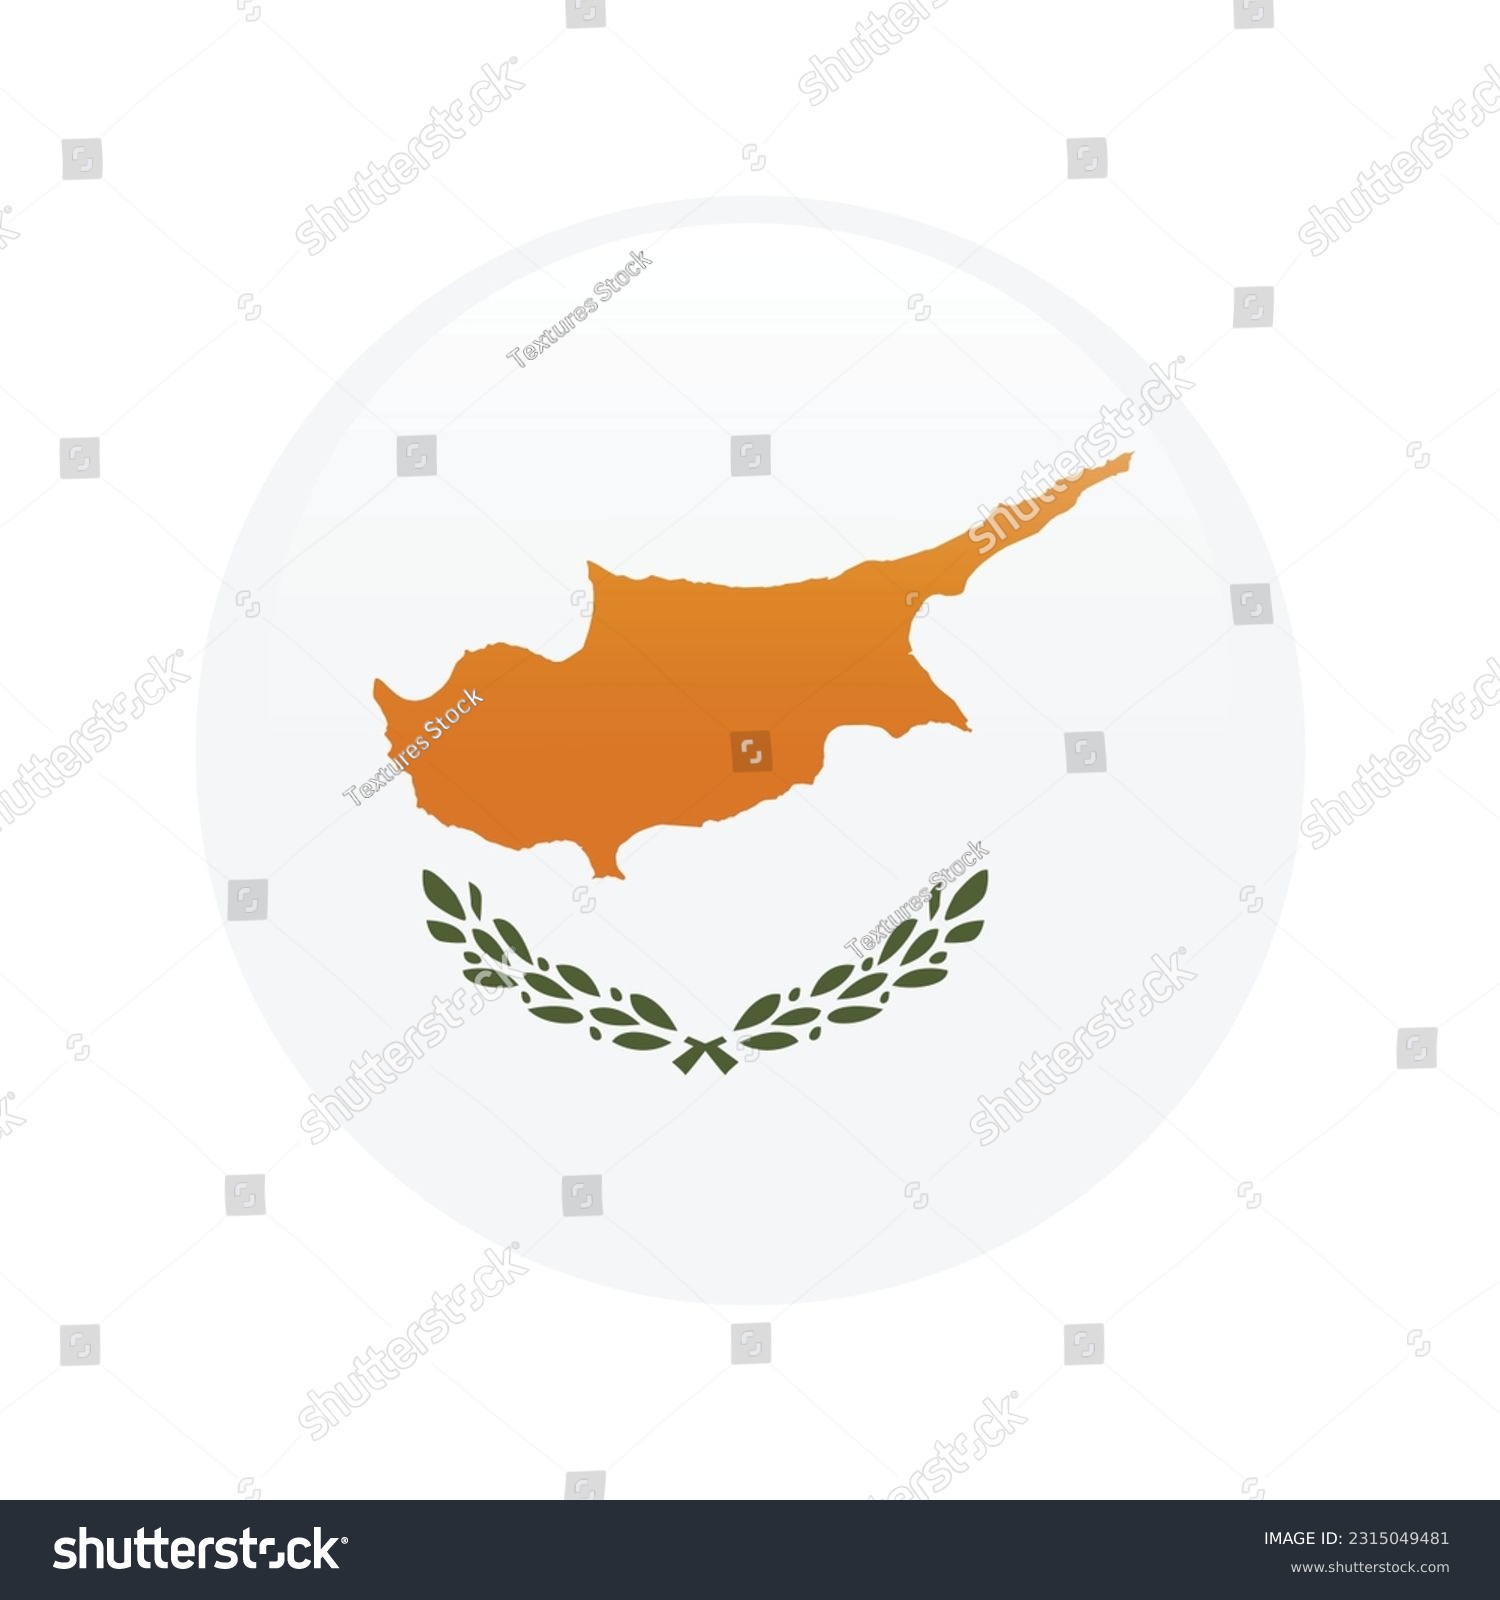 SVG of The flag of Cyprus. Flag icon. Standard color. A round flag. Computer illustration. Digital illustration. Vector illustration. svg